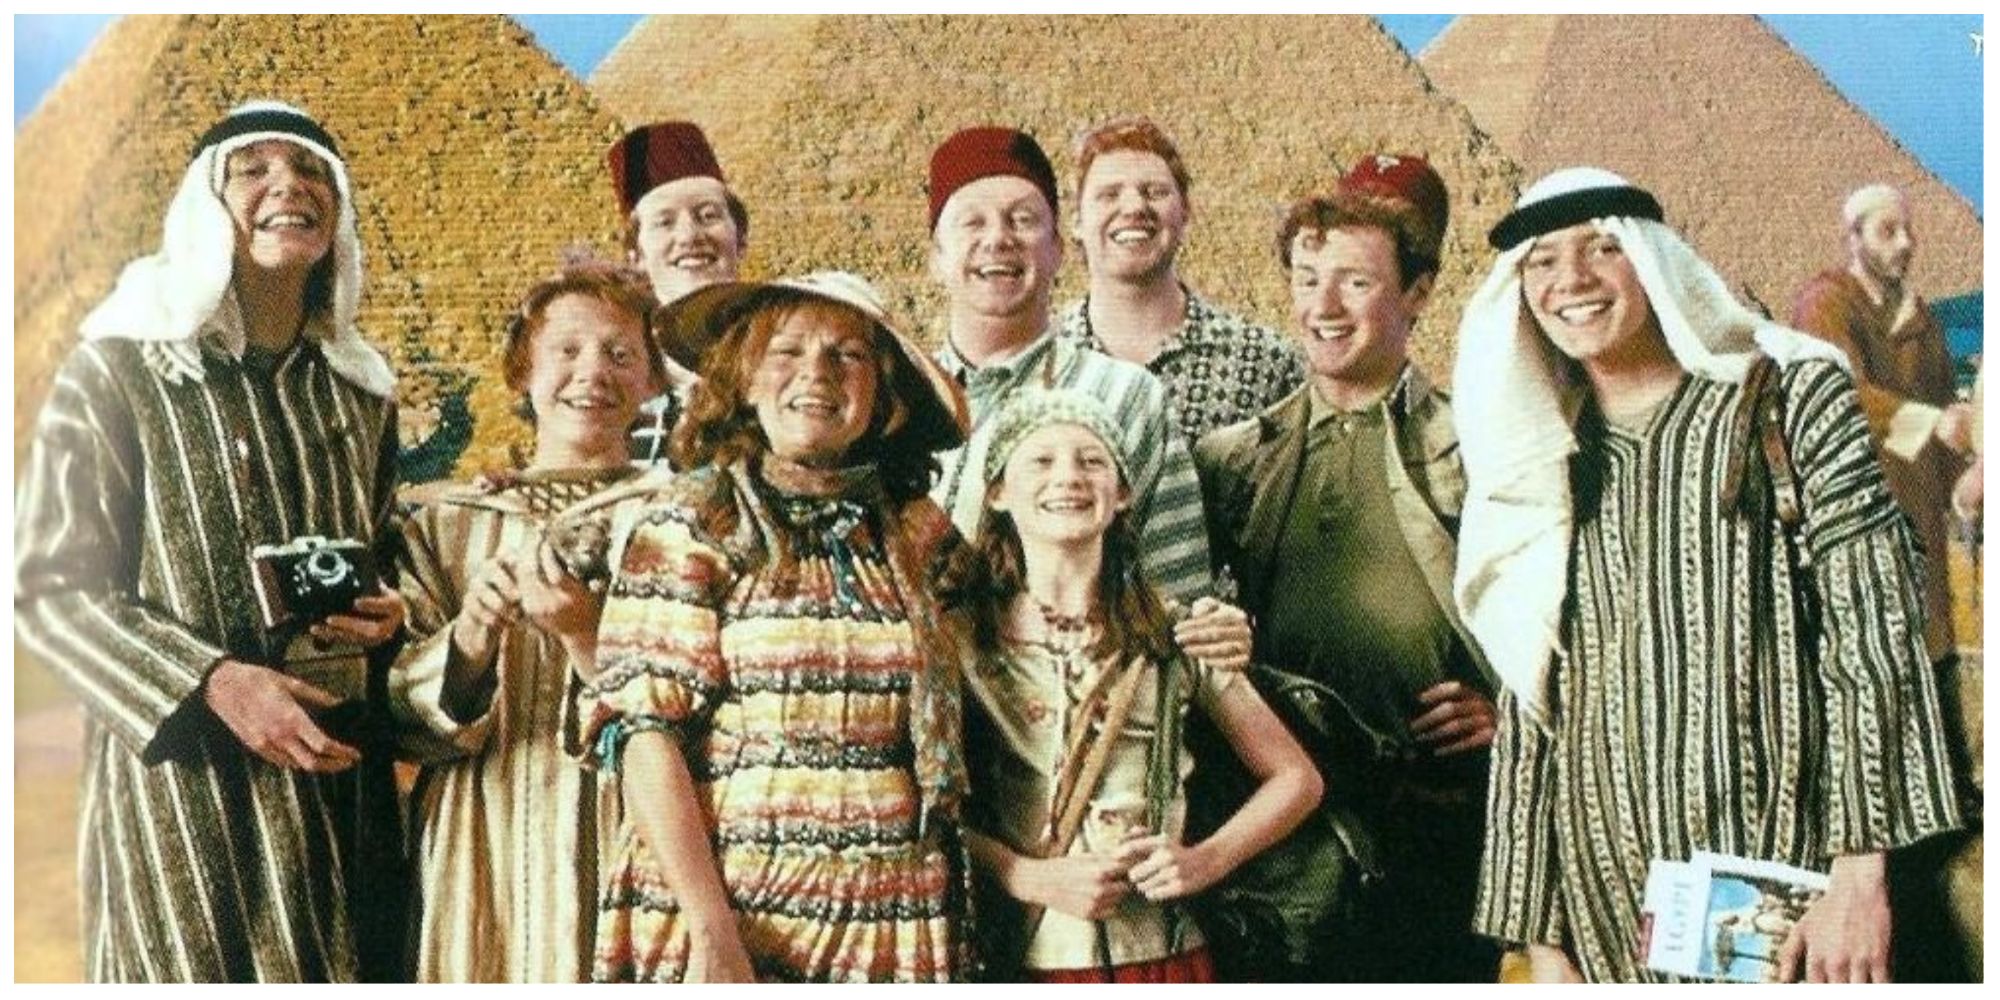 The Weasley Family in Egypt in Harry Potter and The Prisoner of Azakaban